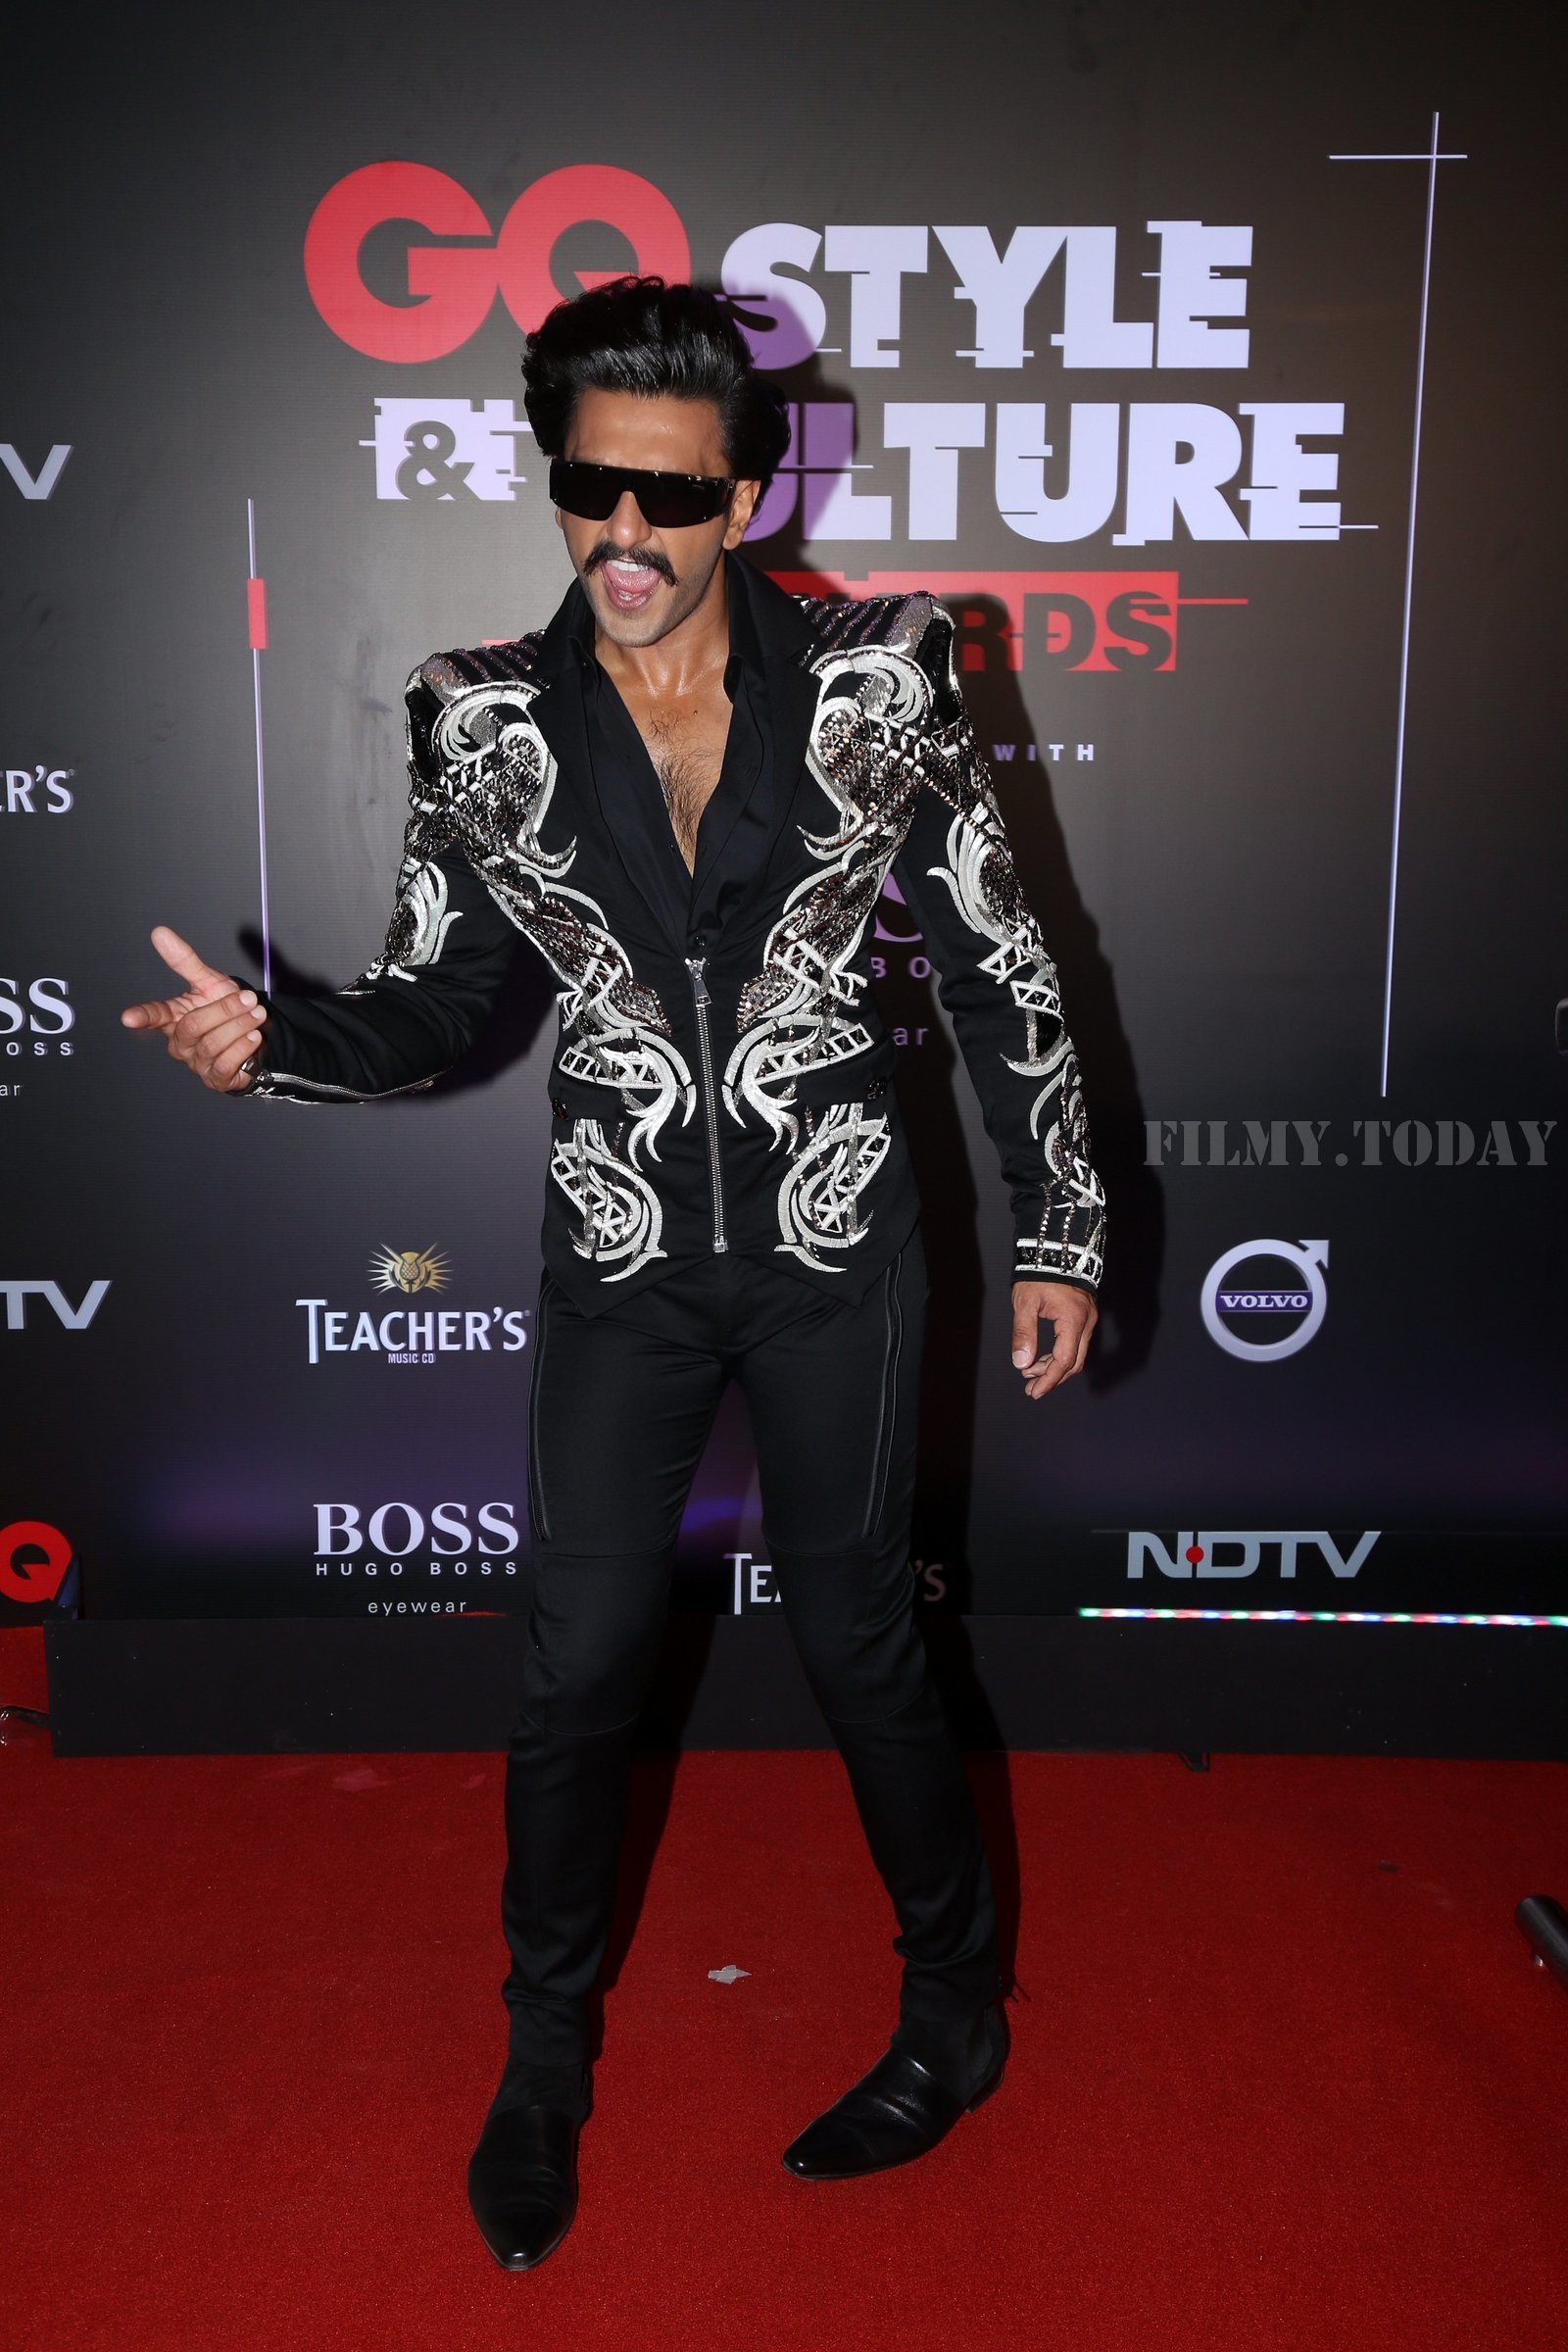 Ranveer Singh - Photos: GQ Style & Culture Awards 2019 at Taj Lands End | Picture 1640131